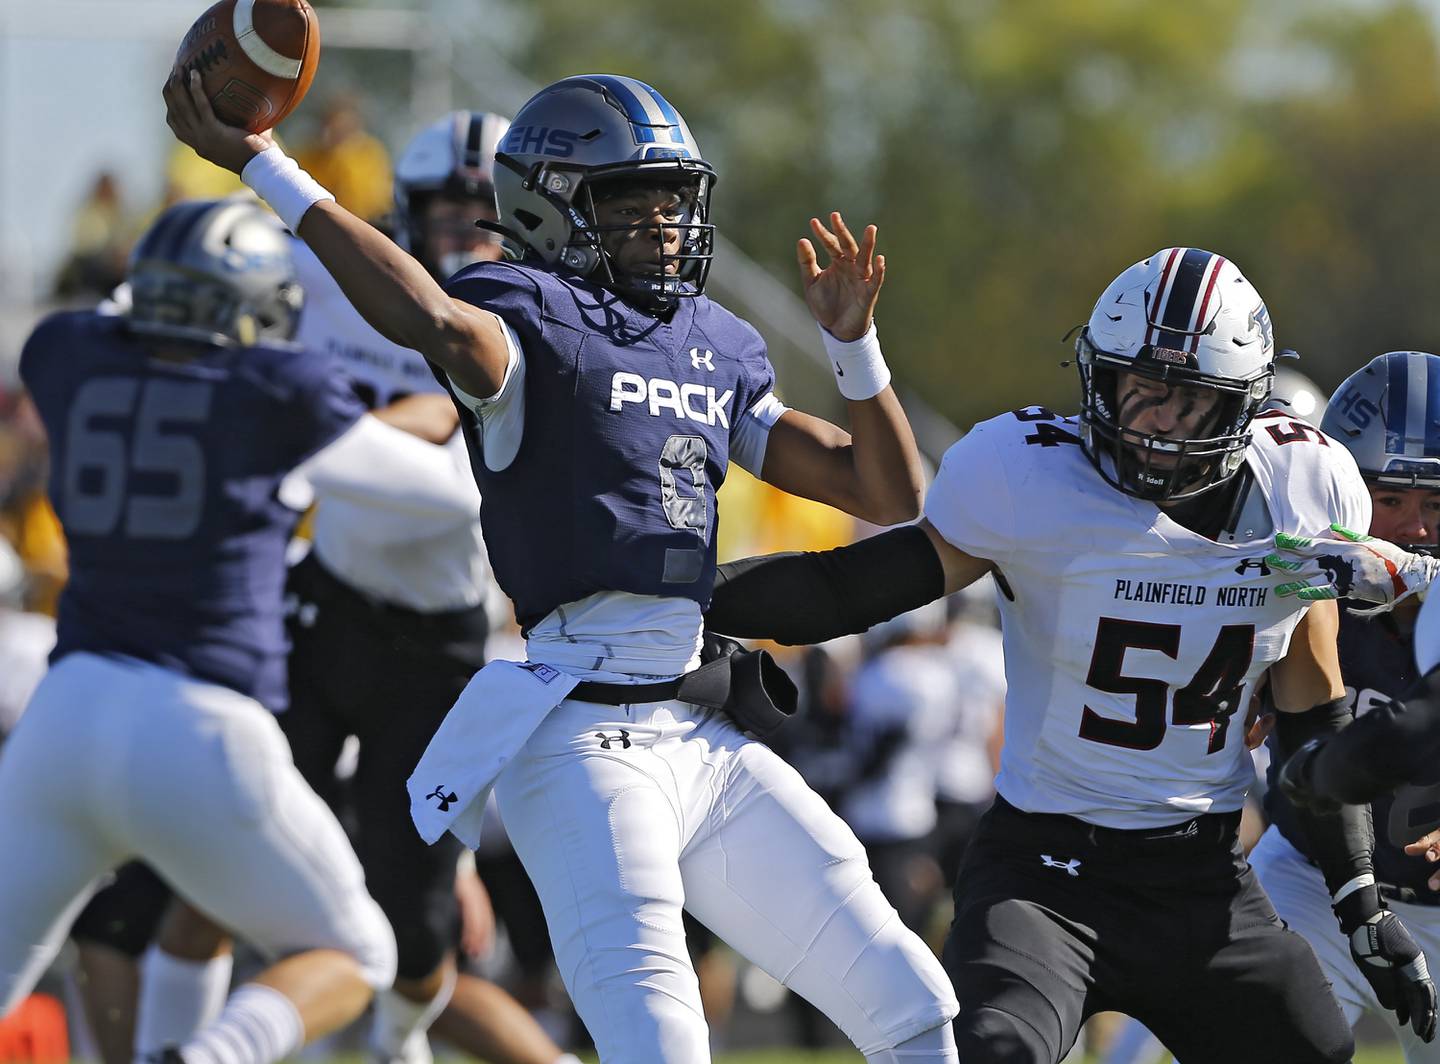 Oswego East's Tre Jones attempts to get rid of the ball as Palinfield North's Justin Yeazell bears down on him during the varsity football game between Plainfield North and Oswego East on Saturday, October 23, 2021 at Oswego East high school in Oswego, IL.